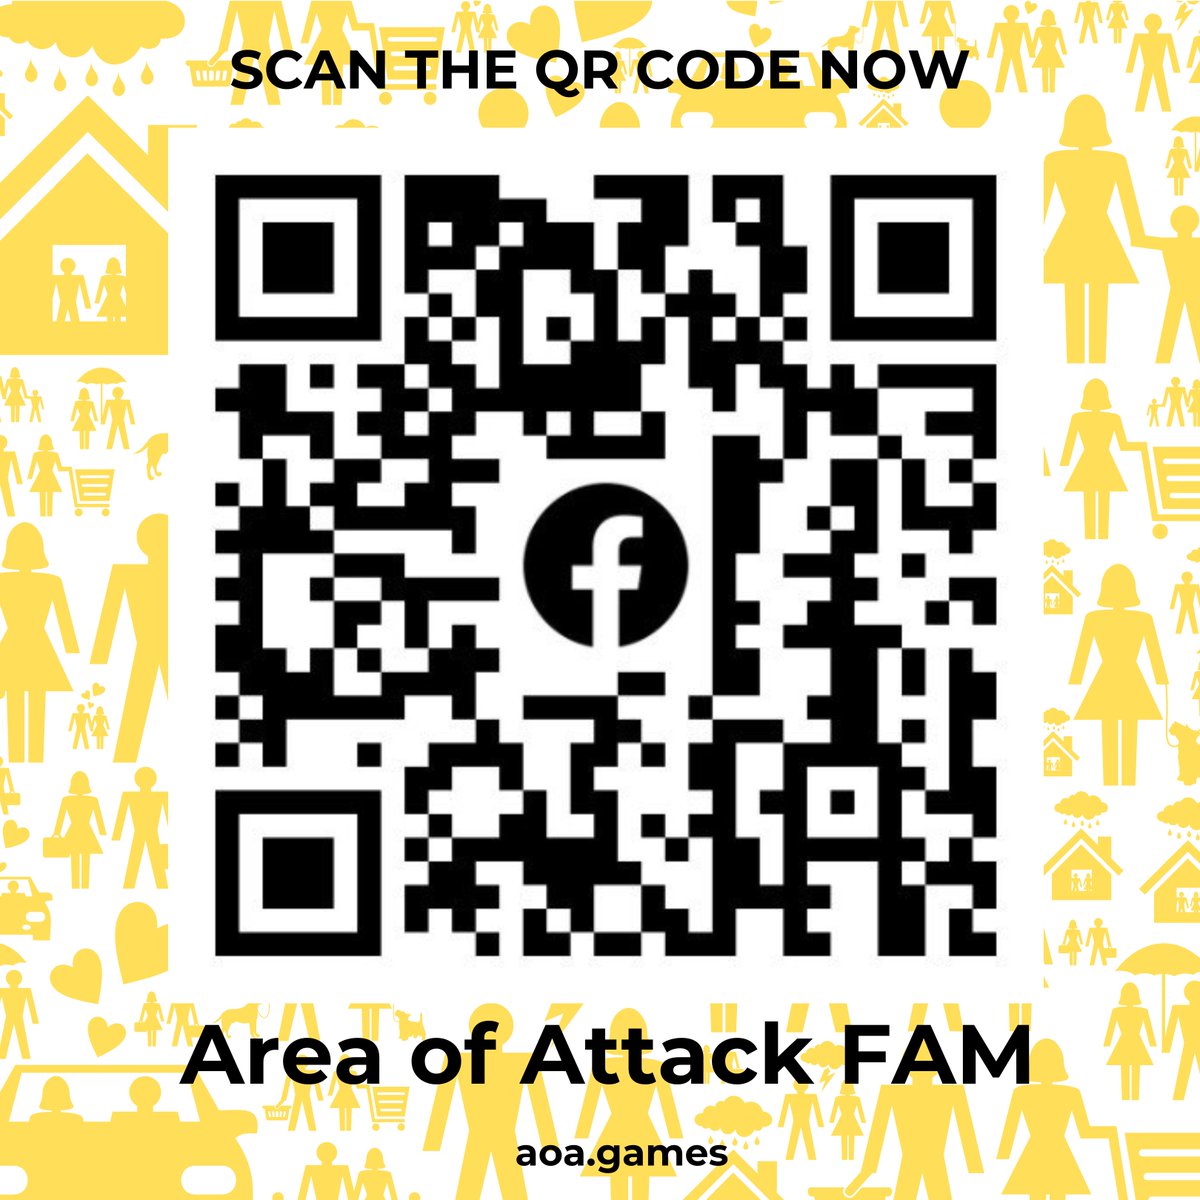 ✨ Be connected with the Official FAM Group of Area of Attack on Facebook ✨ JOIN US NOWAND SCAN THE QR CODE!!! ⚔️ Download the game now via Google Playstore and Apple App Store. aoa.games #AreaOfAttack #AoA #AoAFAM #LetsPlayAoA #Community #Group